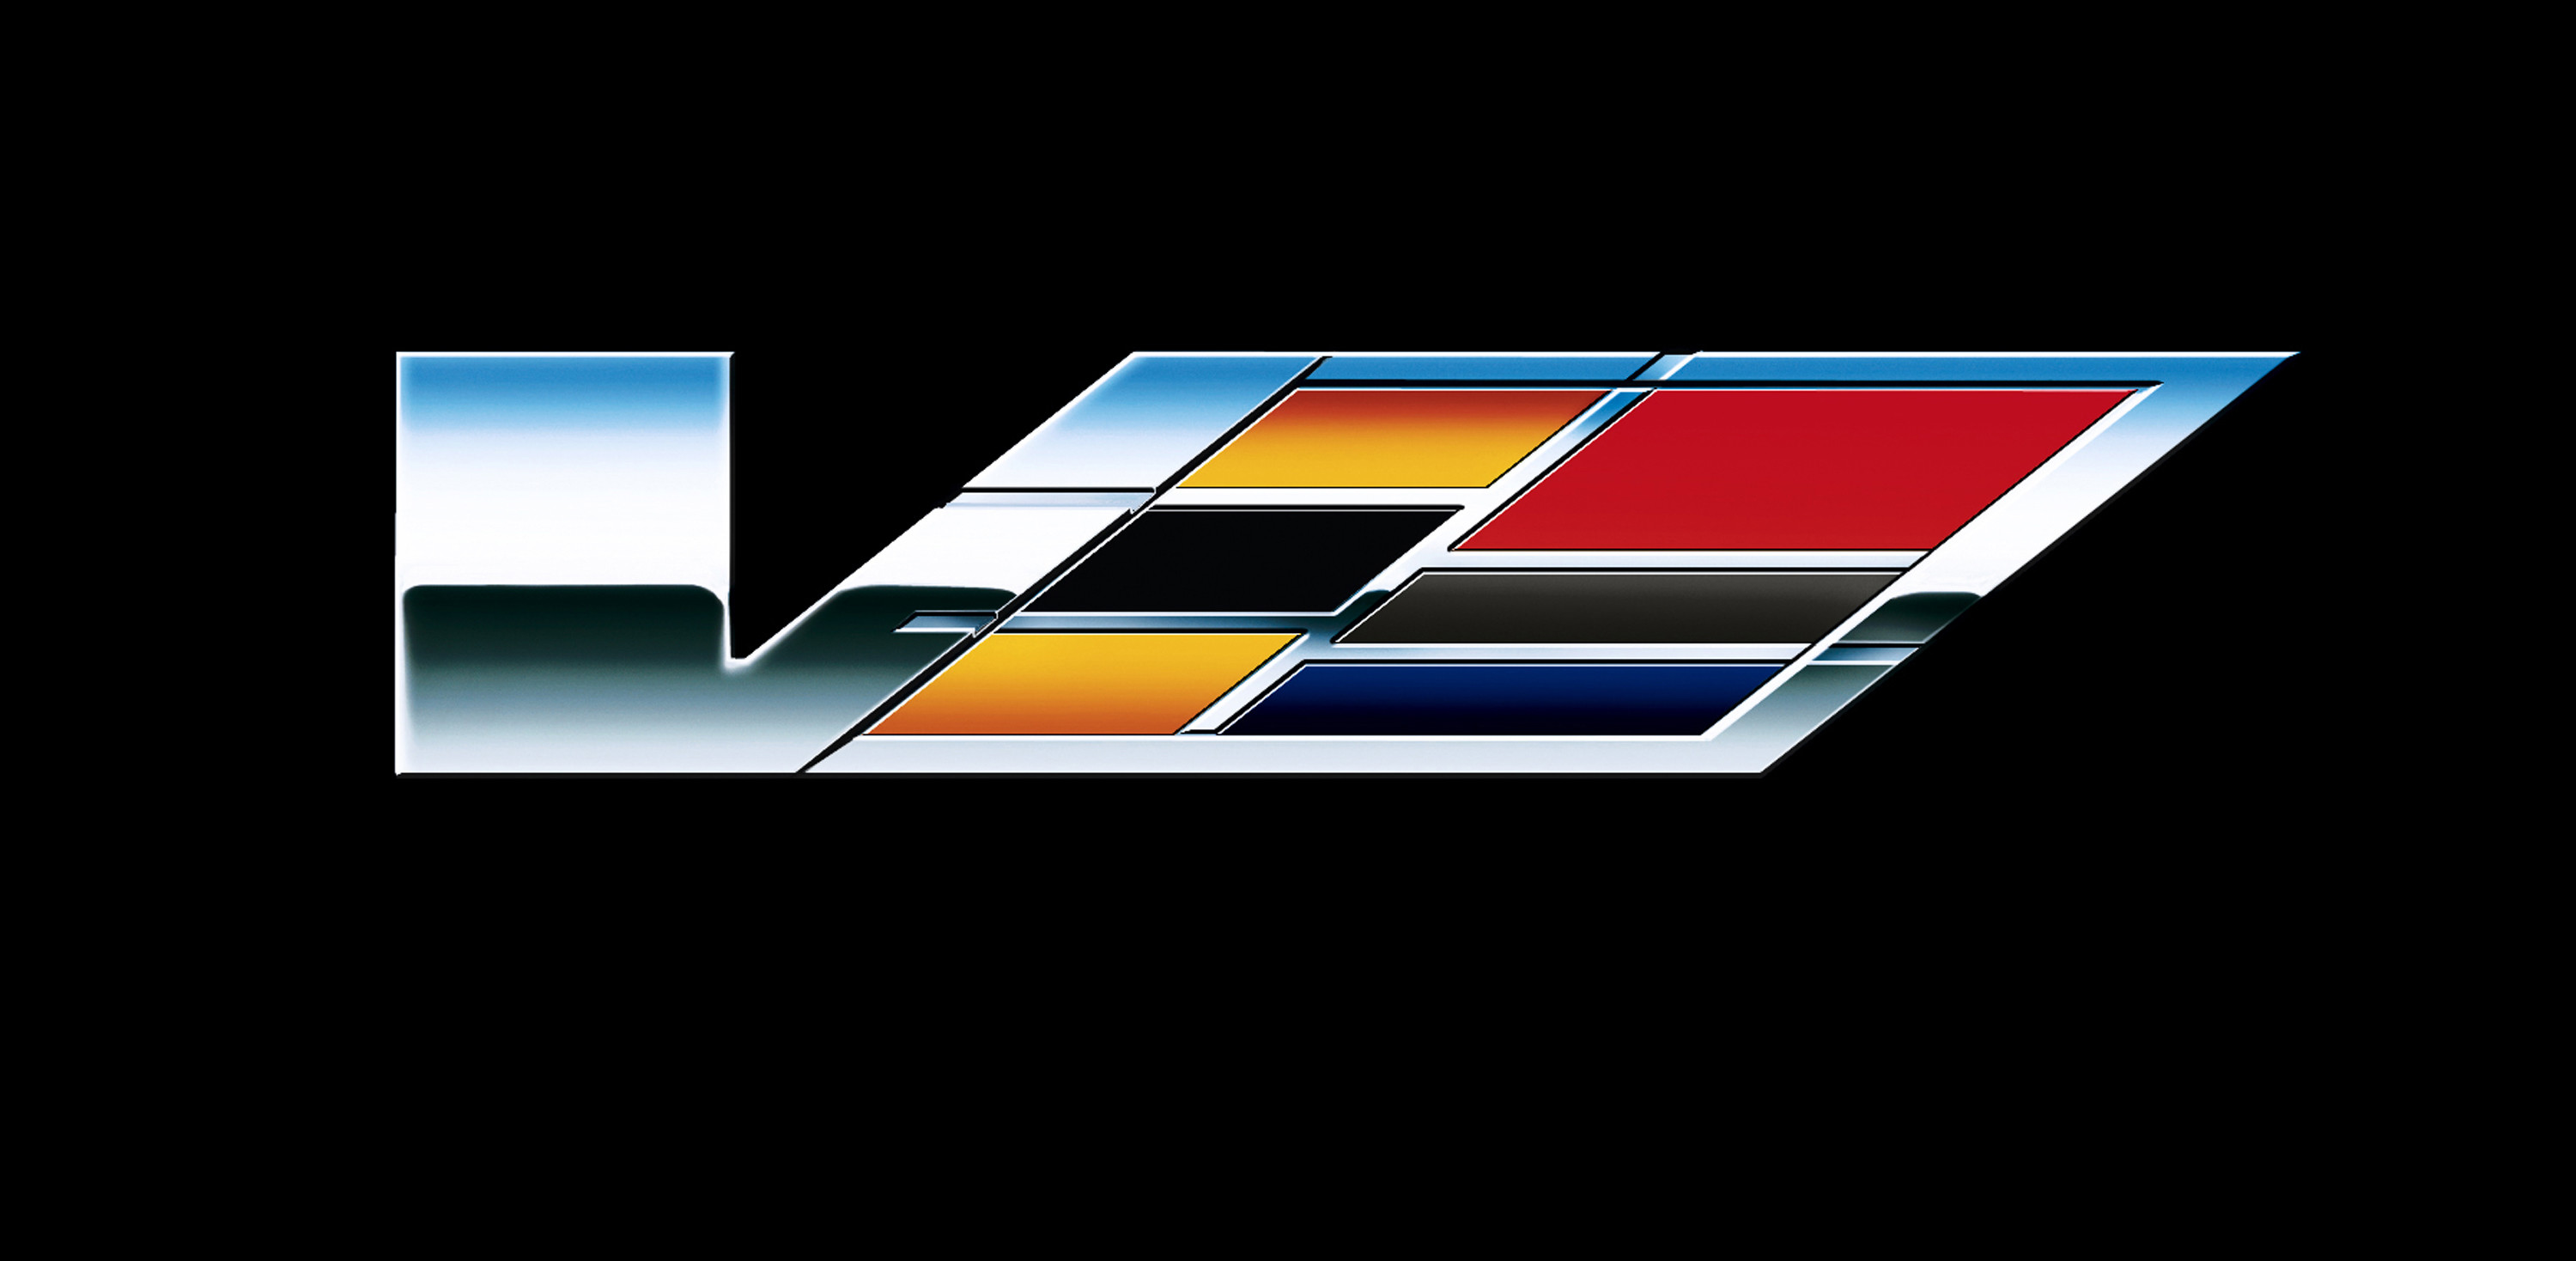 3000x1468 Where can I get High resolution Cadillac and V logos?